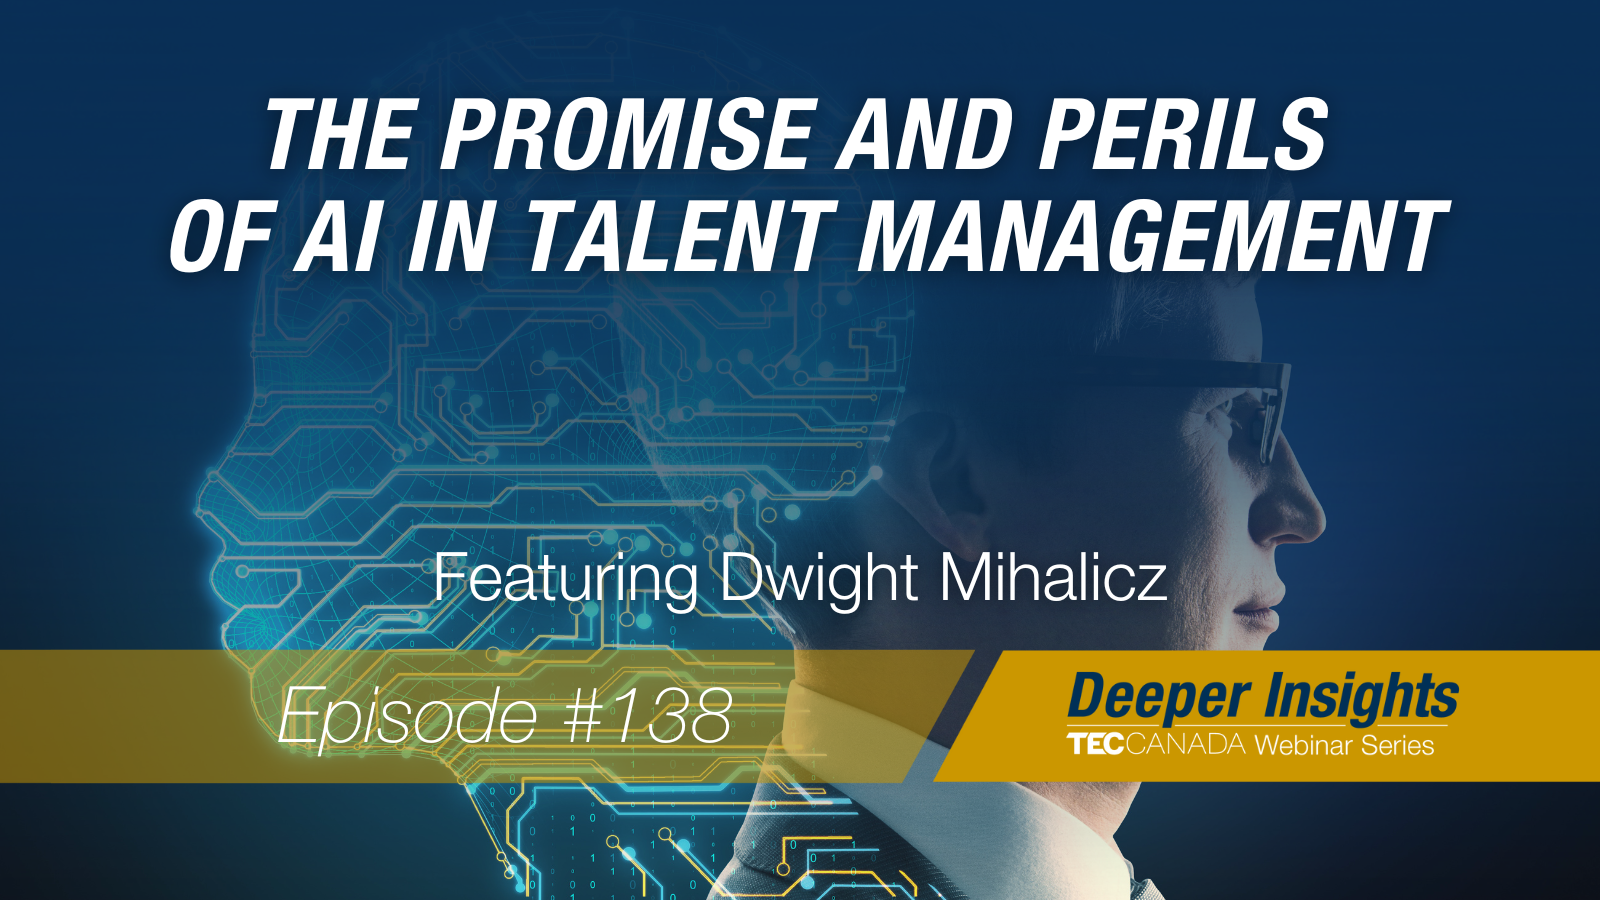 The Promise and Perils of AI in Talent Management,” with Dwight Mihalicz